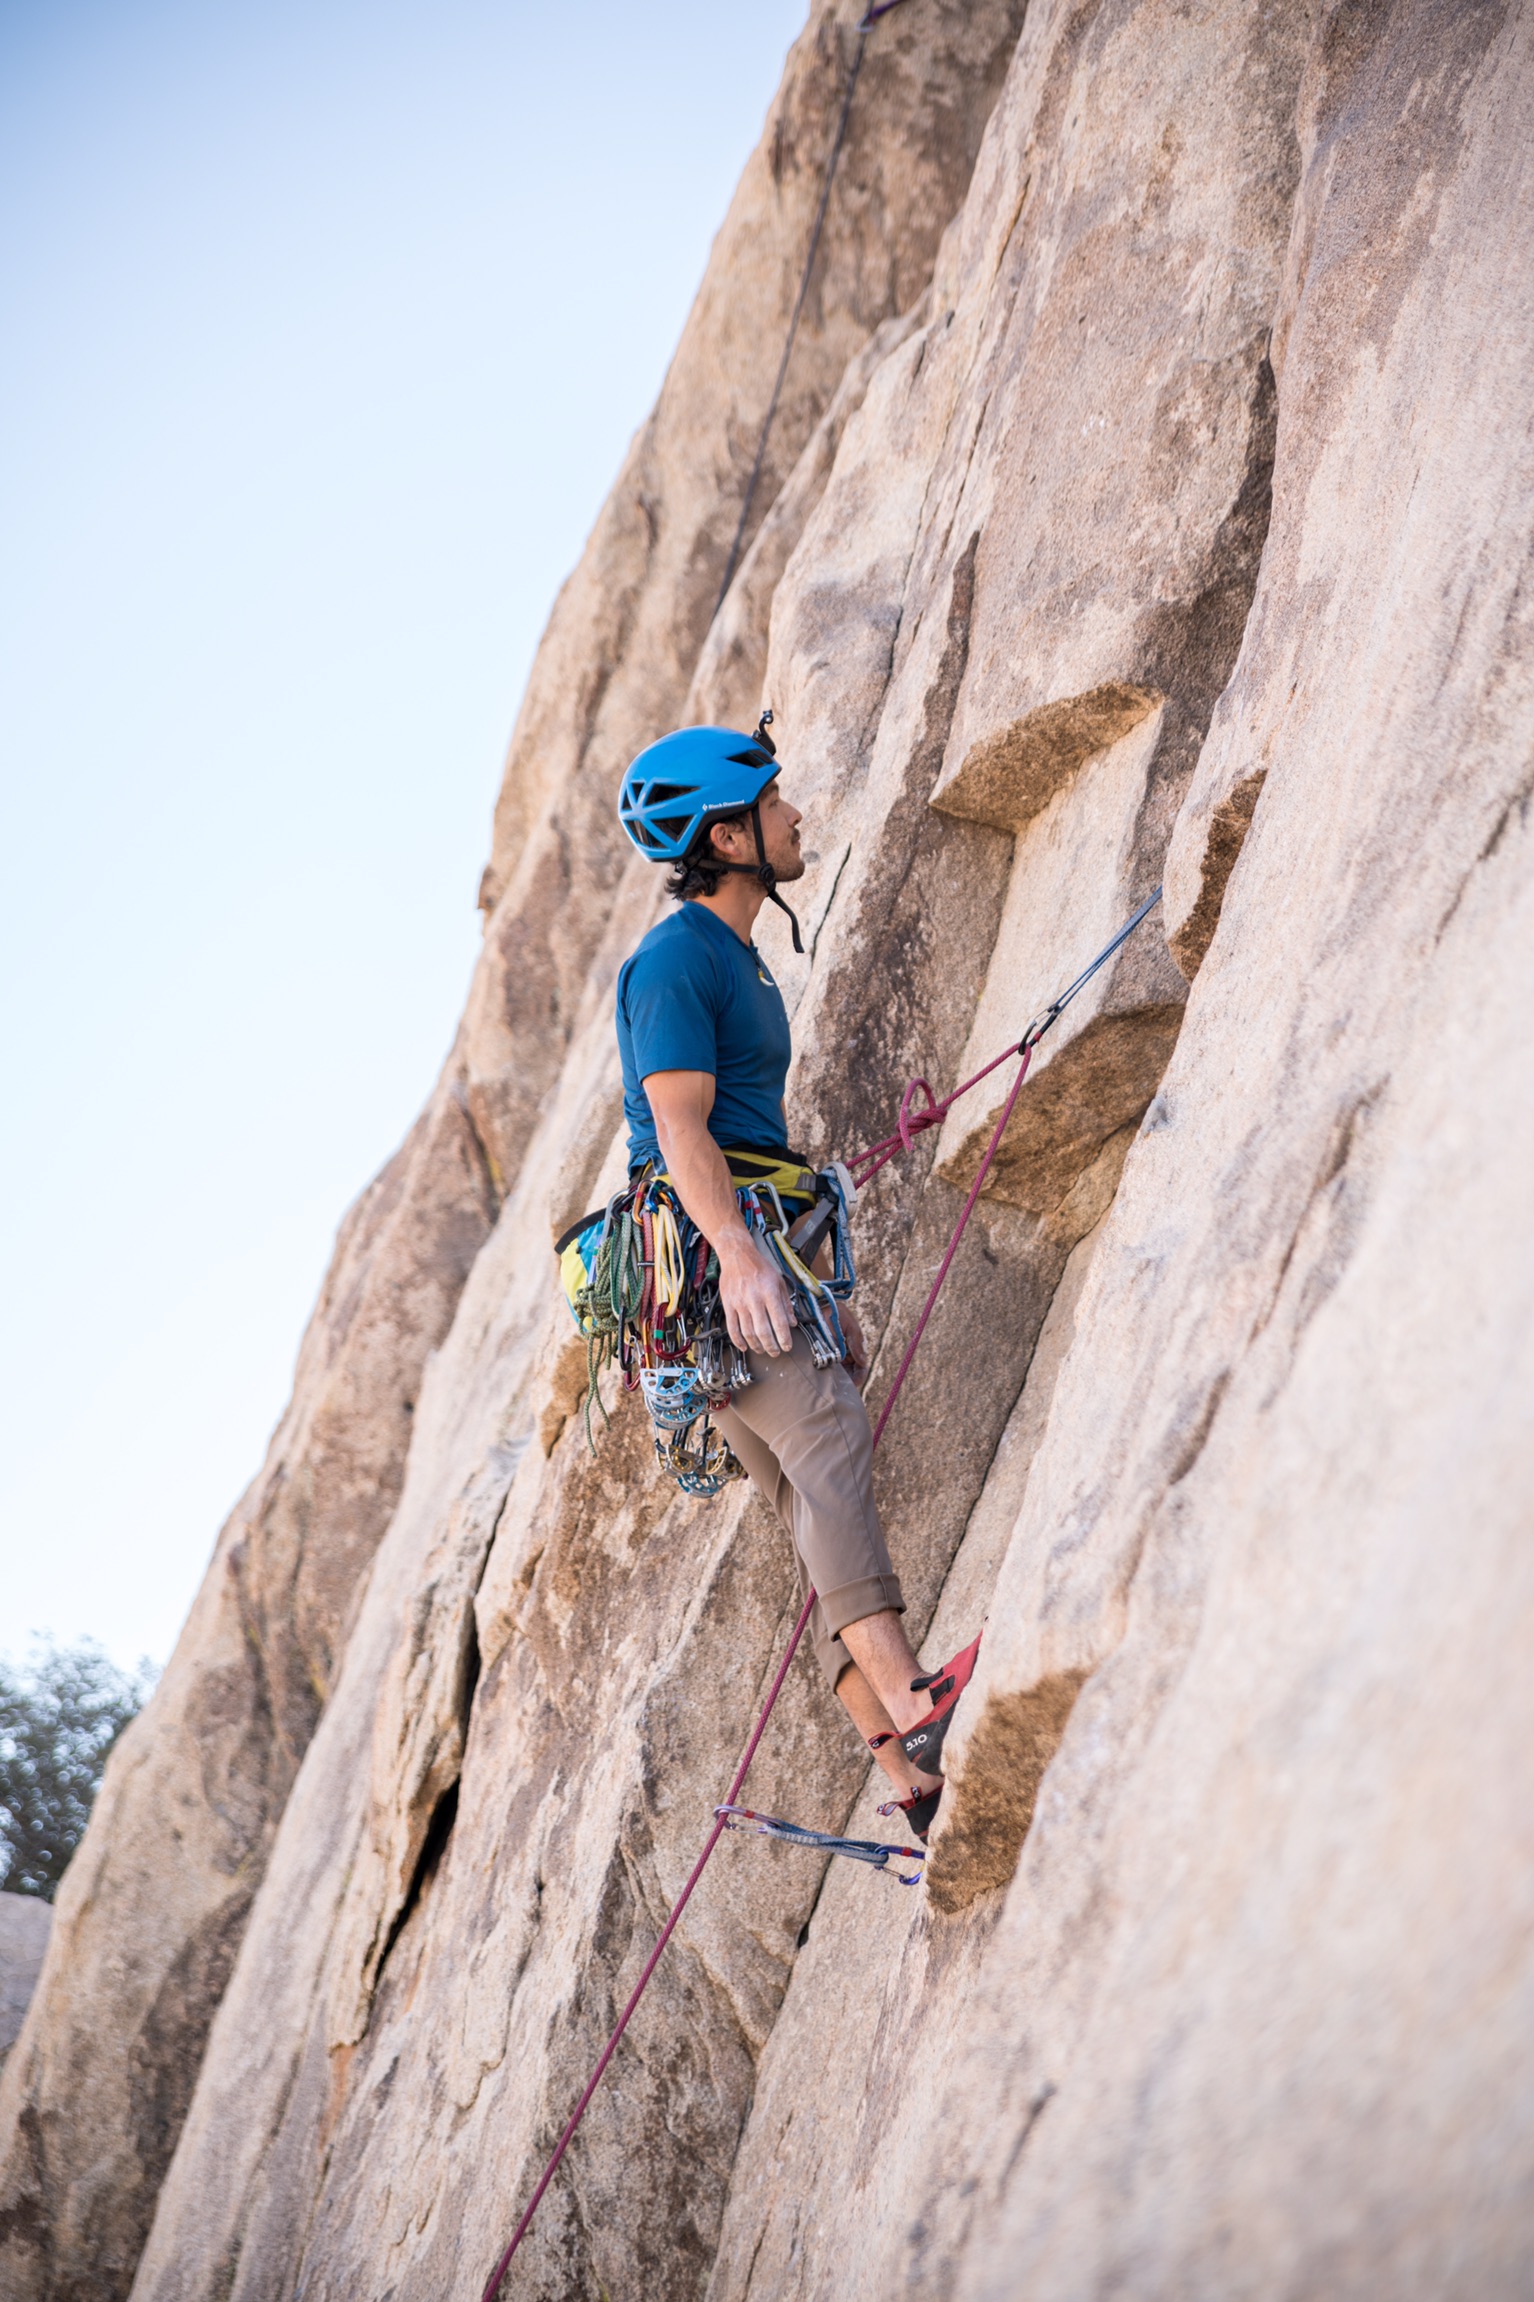 A man wearing a helmet and carrying climbing gear around his waist, looks at a massive rock face, as he is held to it by a rope.